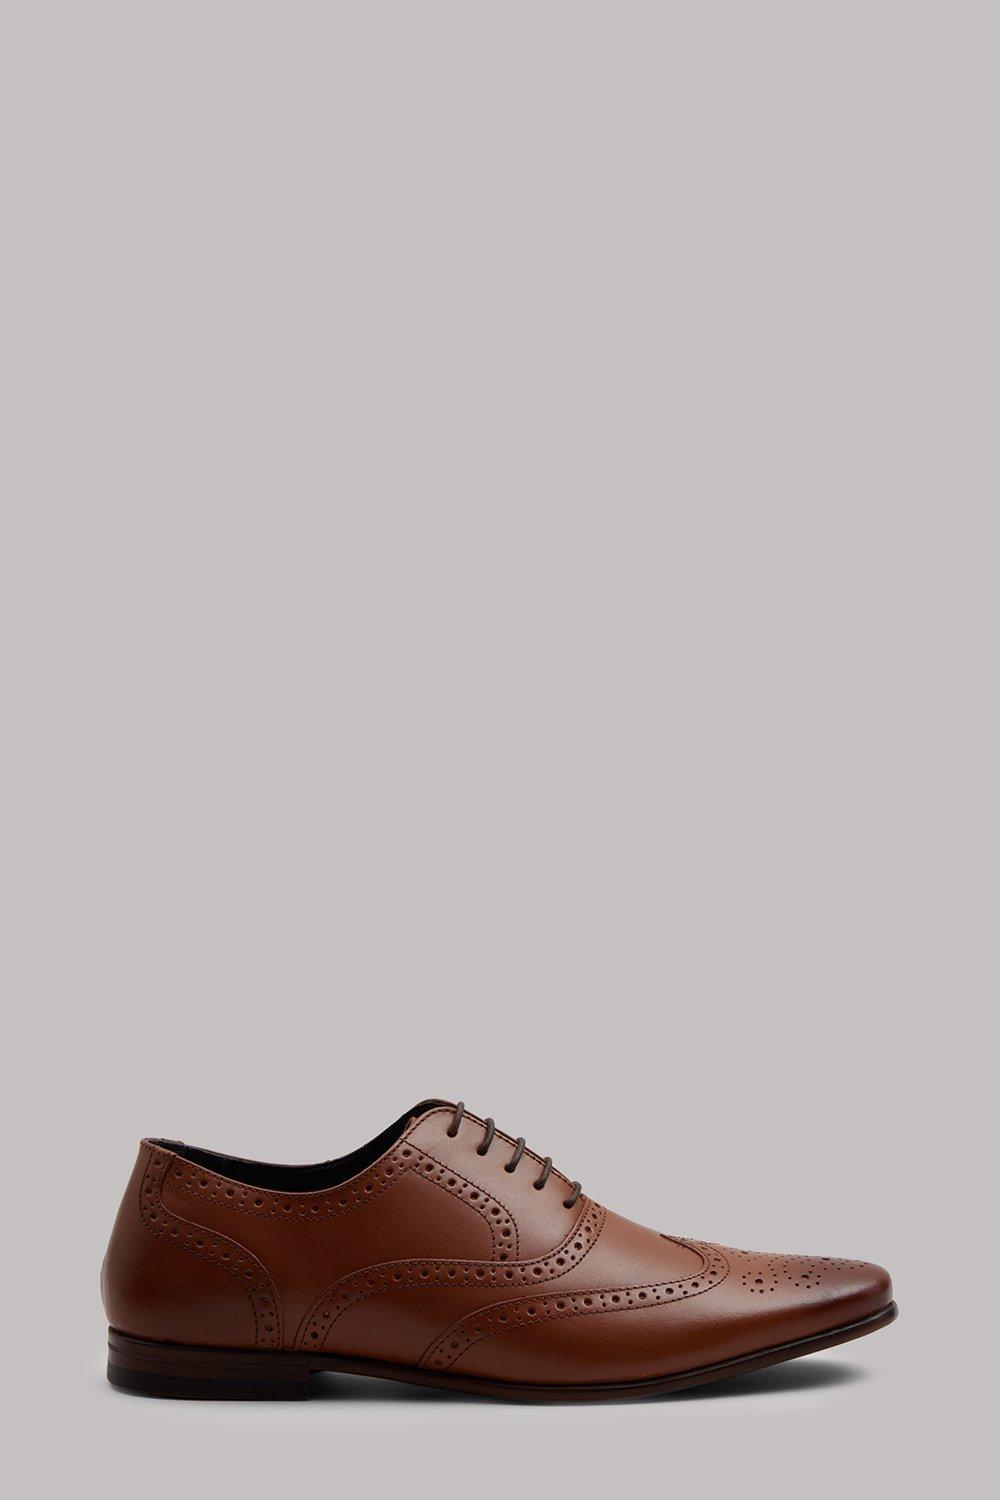 Mens Leather Brogue Shoes - Tan - 8